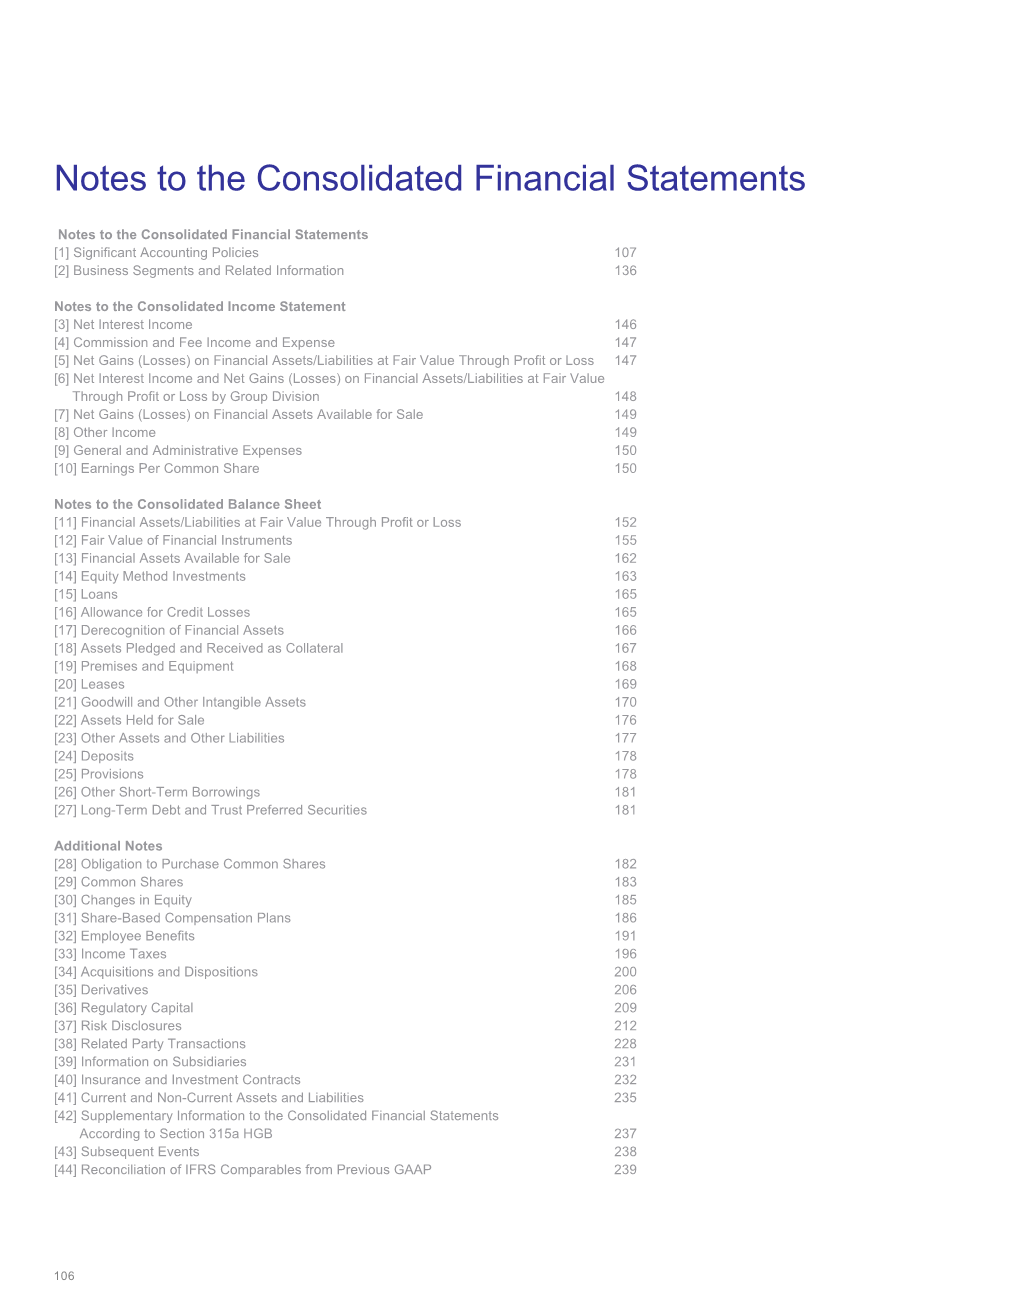 Notes to the Consolidated Financial Statements